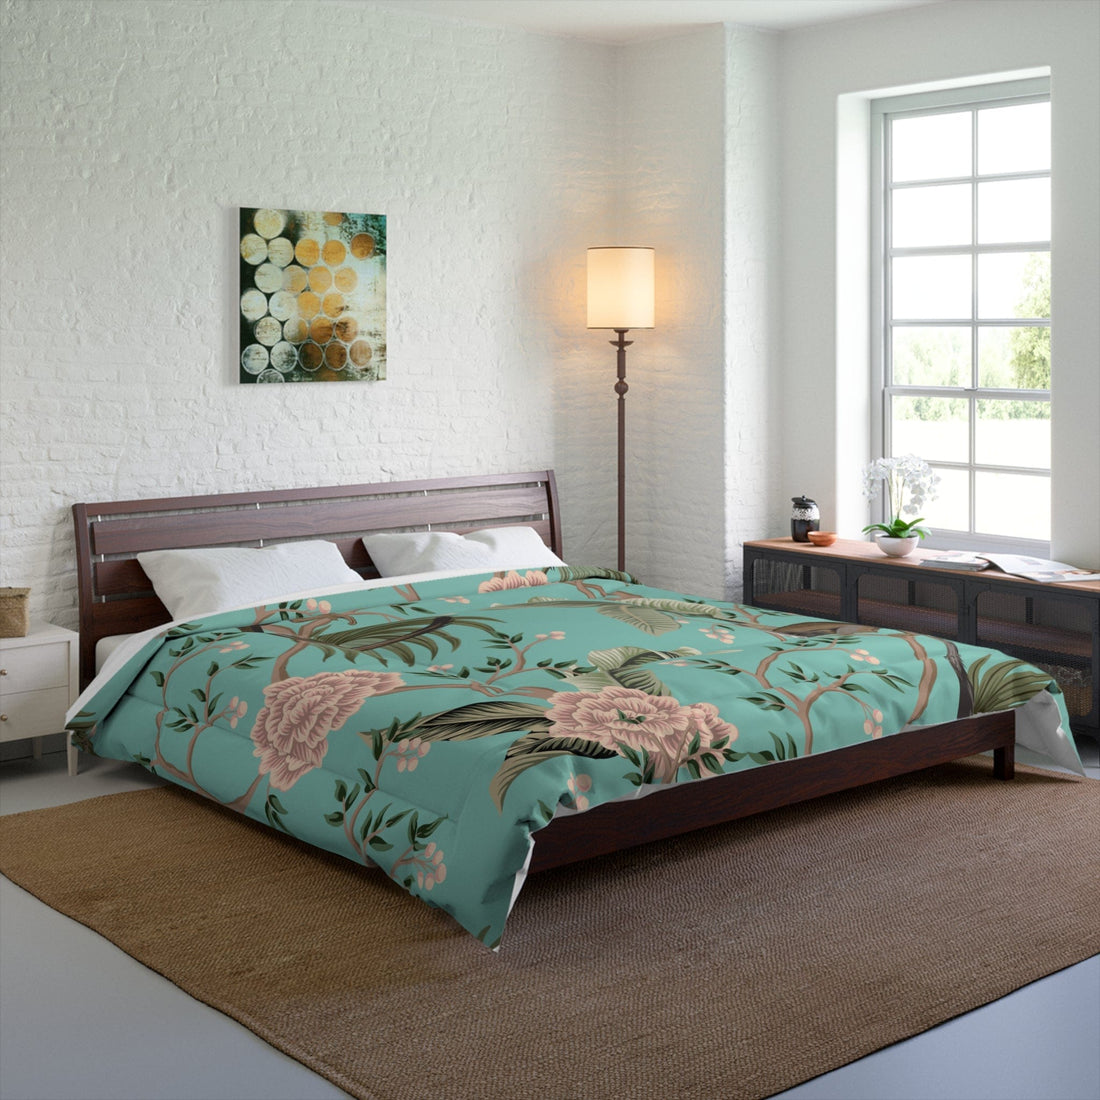 Kate McEnroe New York Chinoiserie Monkey Floral Comforter, Teal Pink Botanical Bedding Comforters 104&quot; × 88&quot; 11966184077994319046